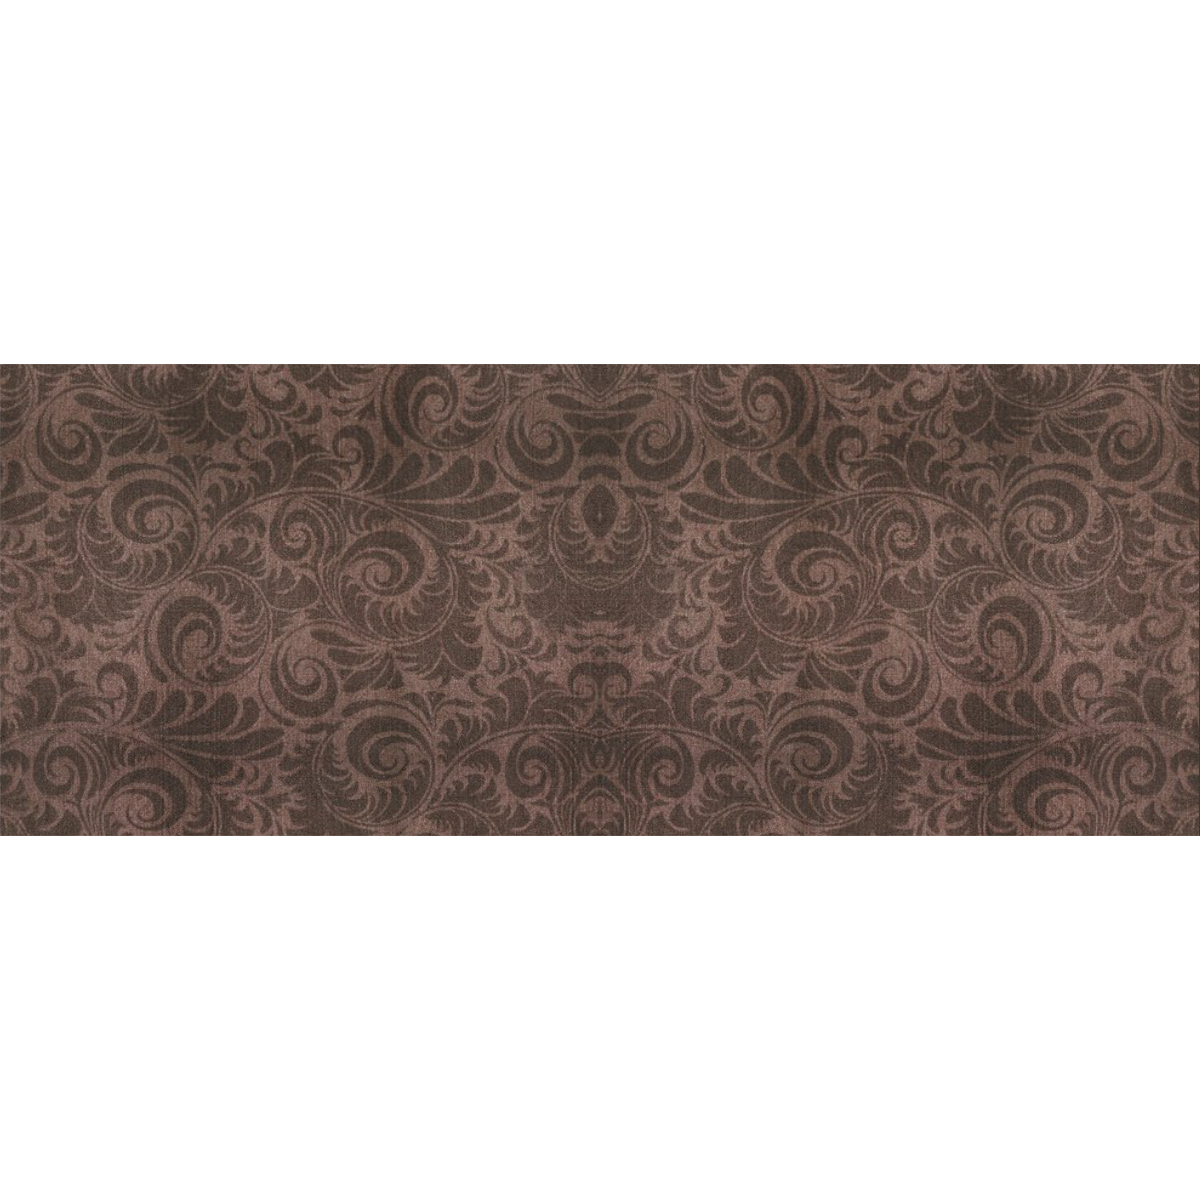 Denim with vintage floral pattern, rich brown Gift Wrapping Paper 58"x 23" (5 Rolls)